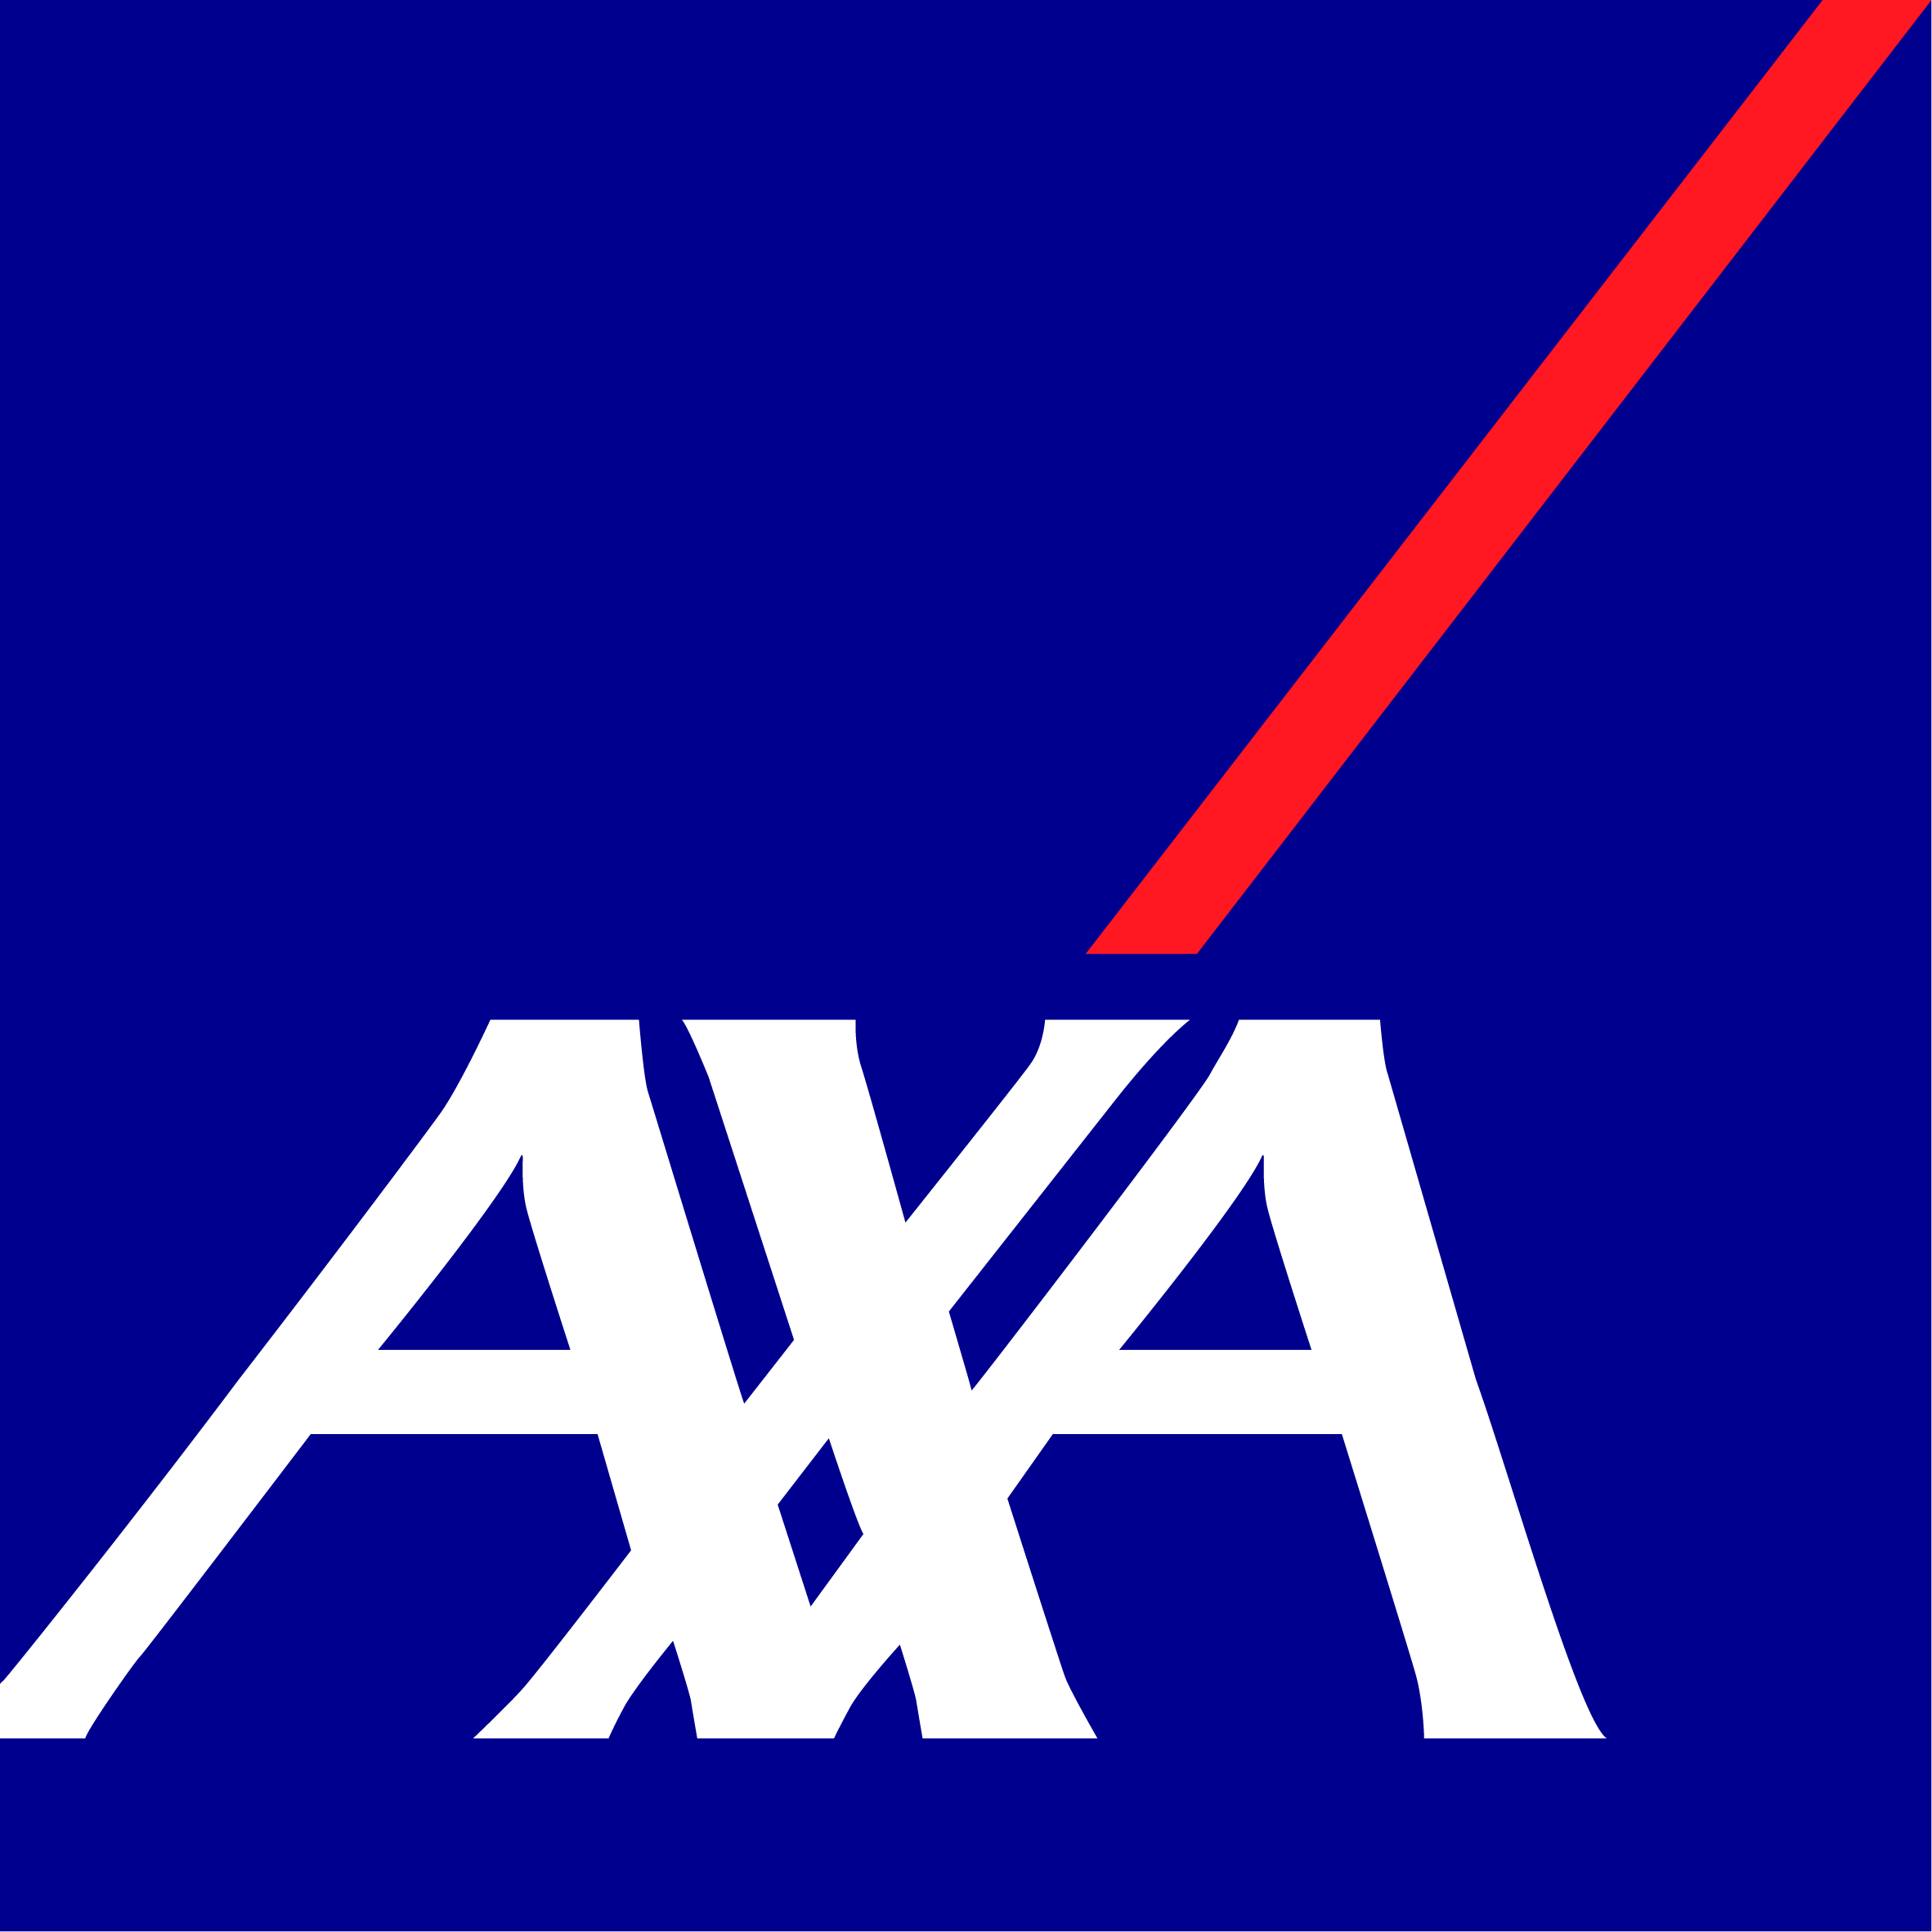 Gilles Moëc to join AXA as Group Chief Economist